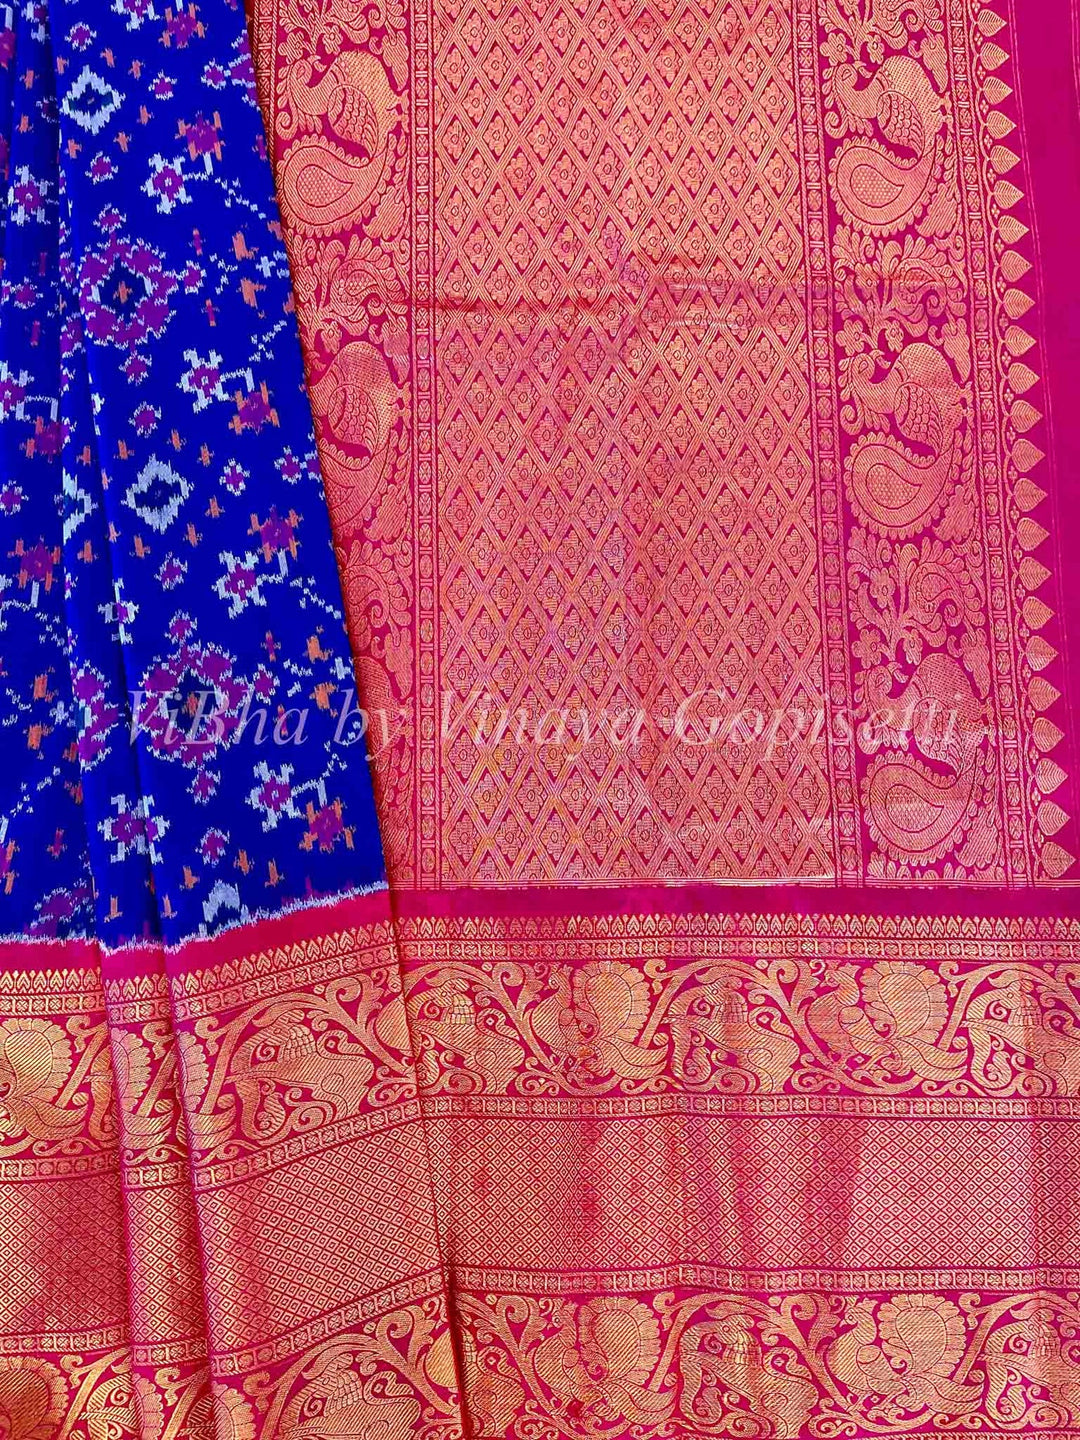 Royal Blue and Pink Ikkat Silk Saree with Kanchi borders and Blouse.